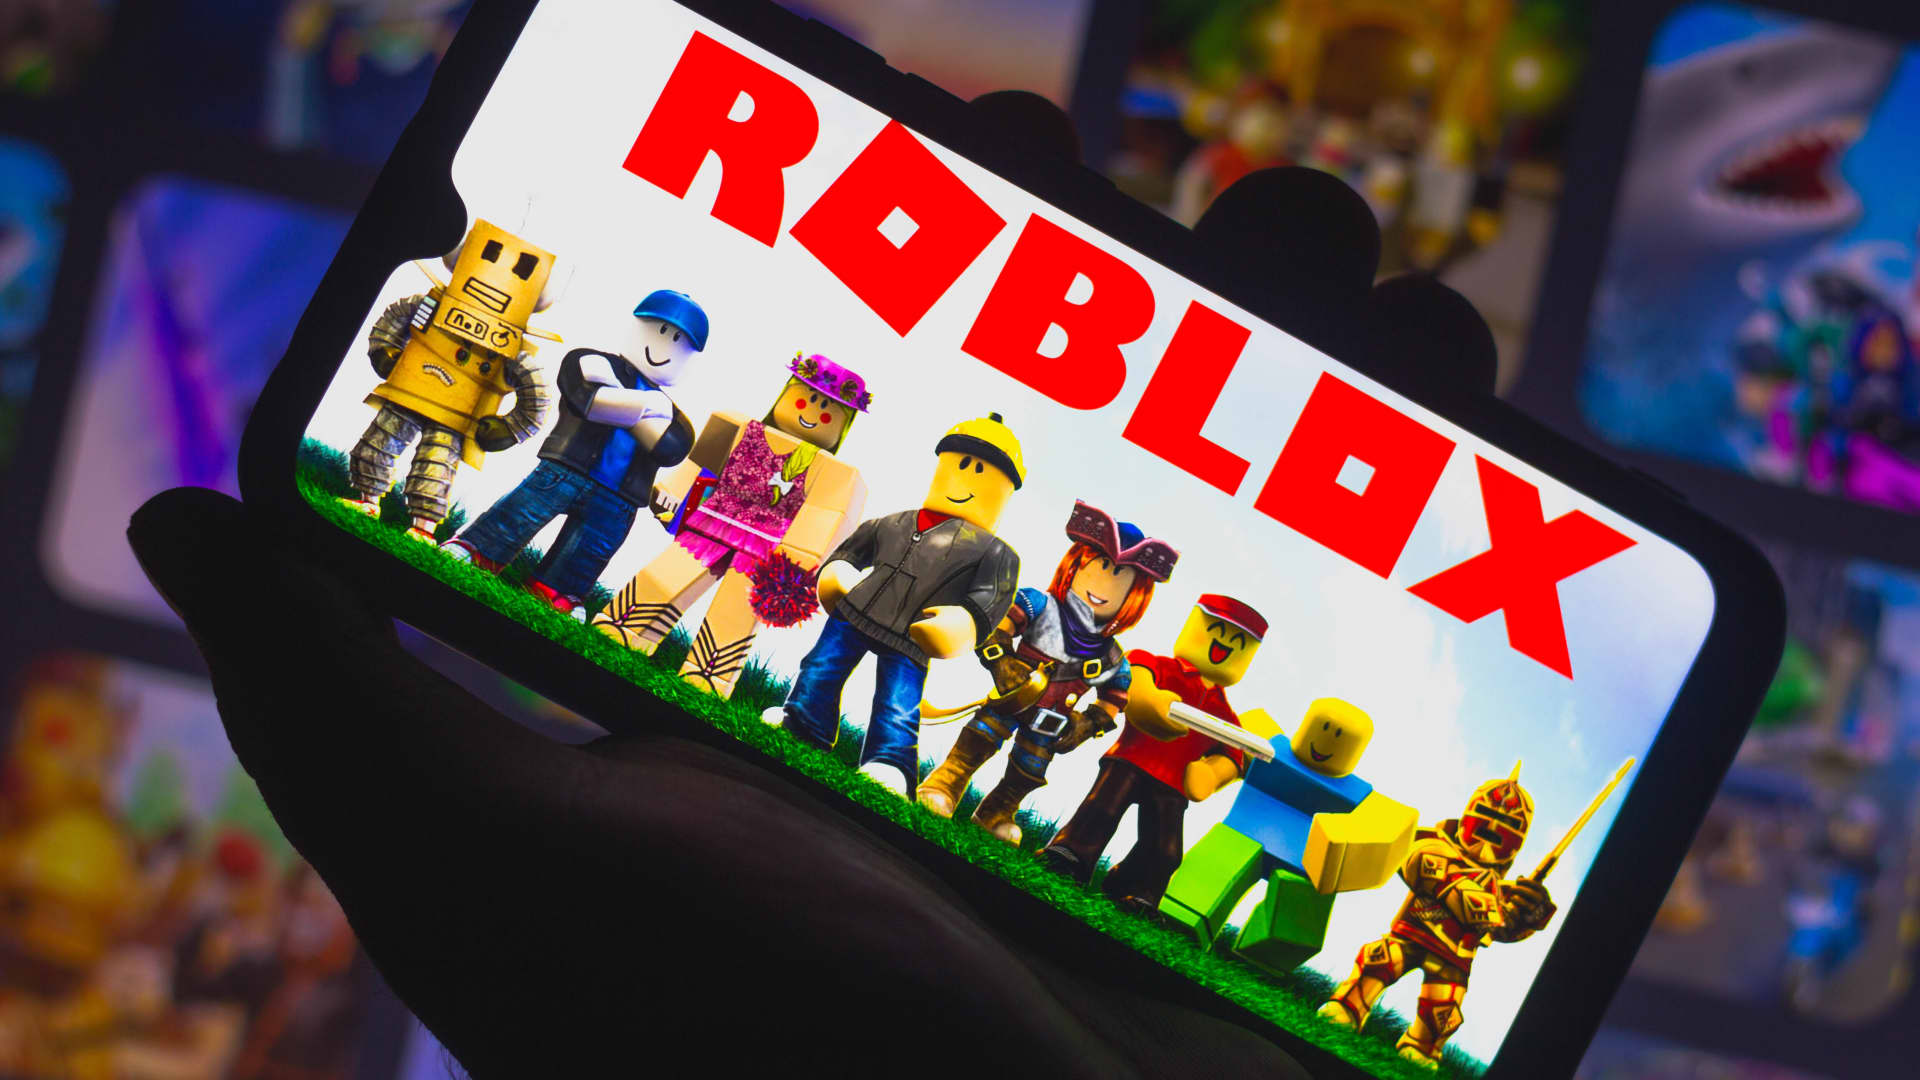 Stocks making the biggest moves midday: Roblox, Penn Entertainment, Upstart and more